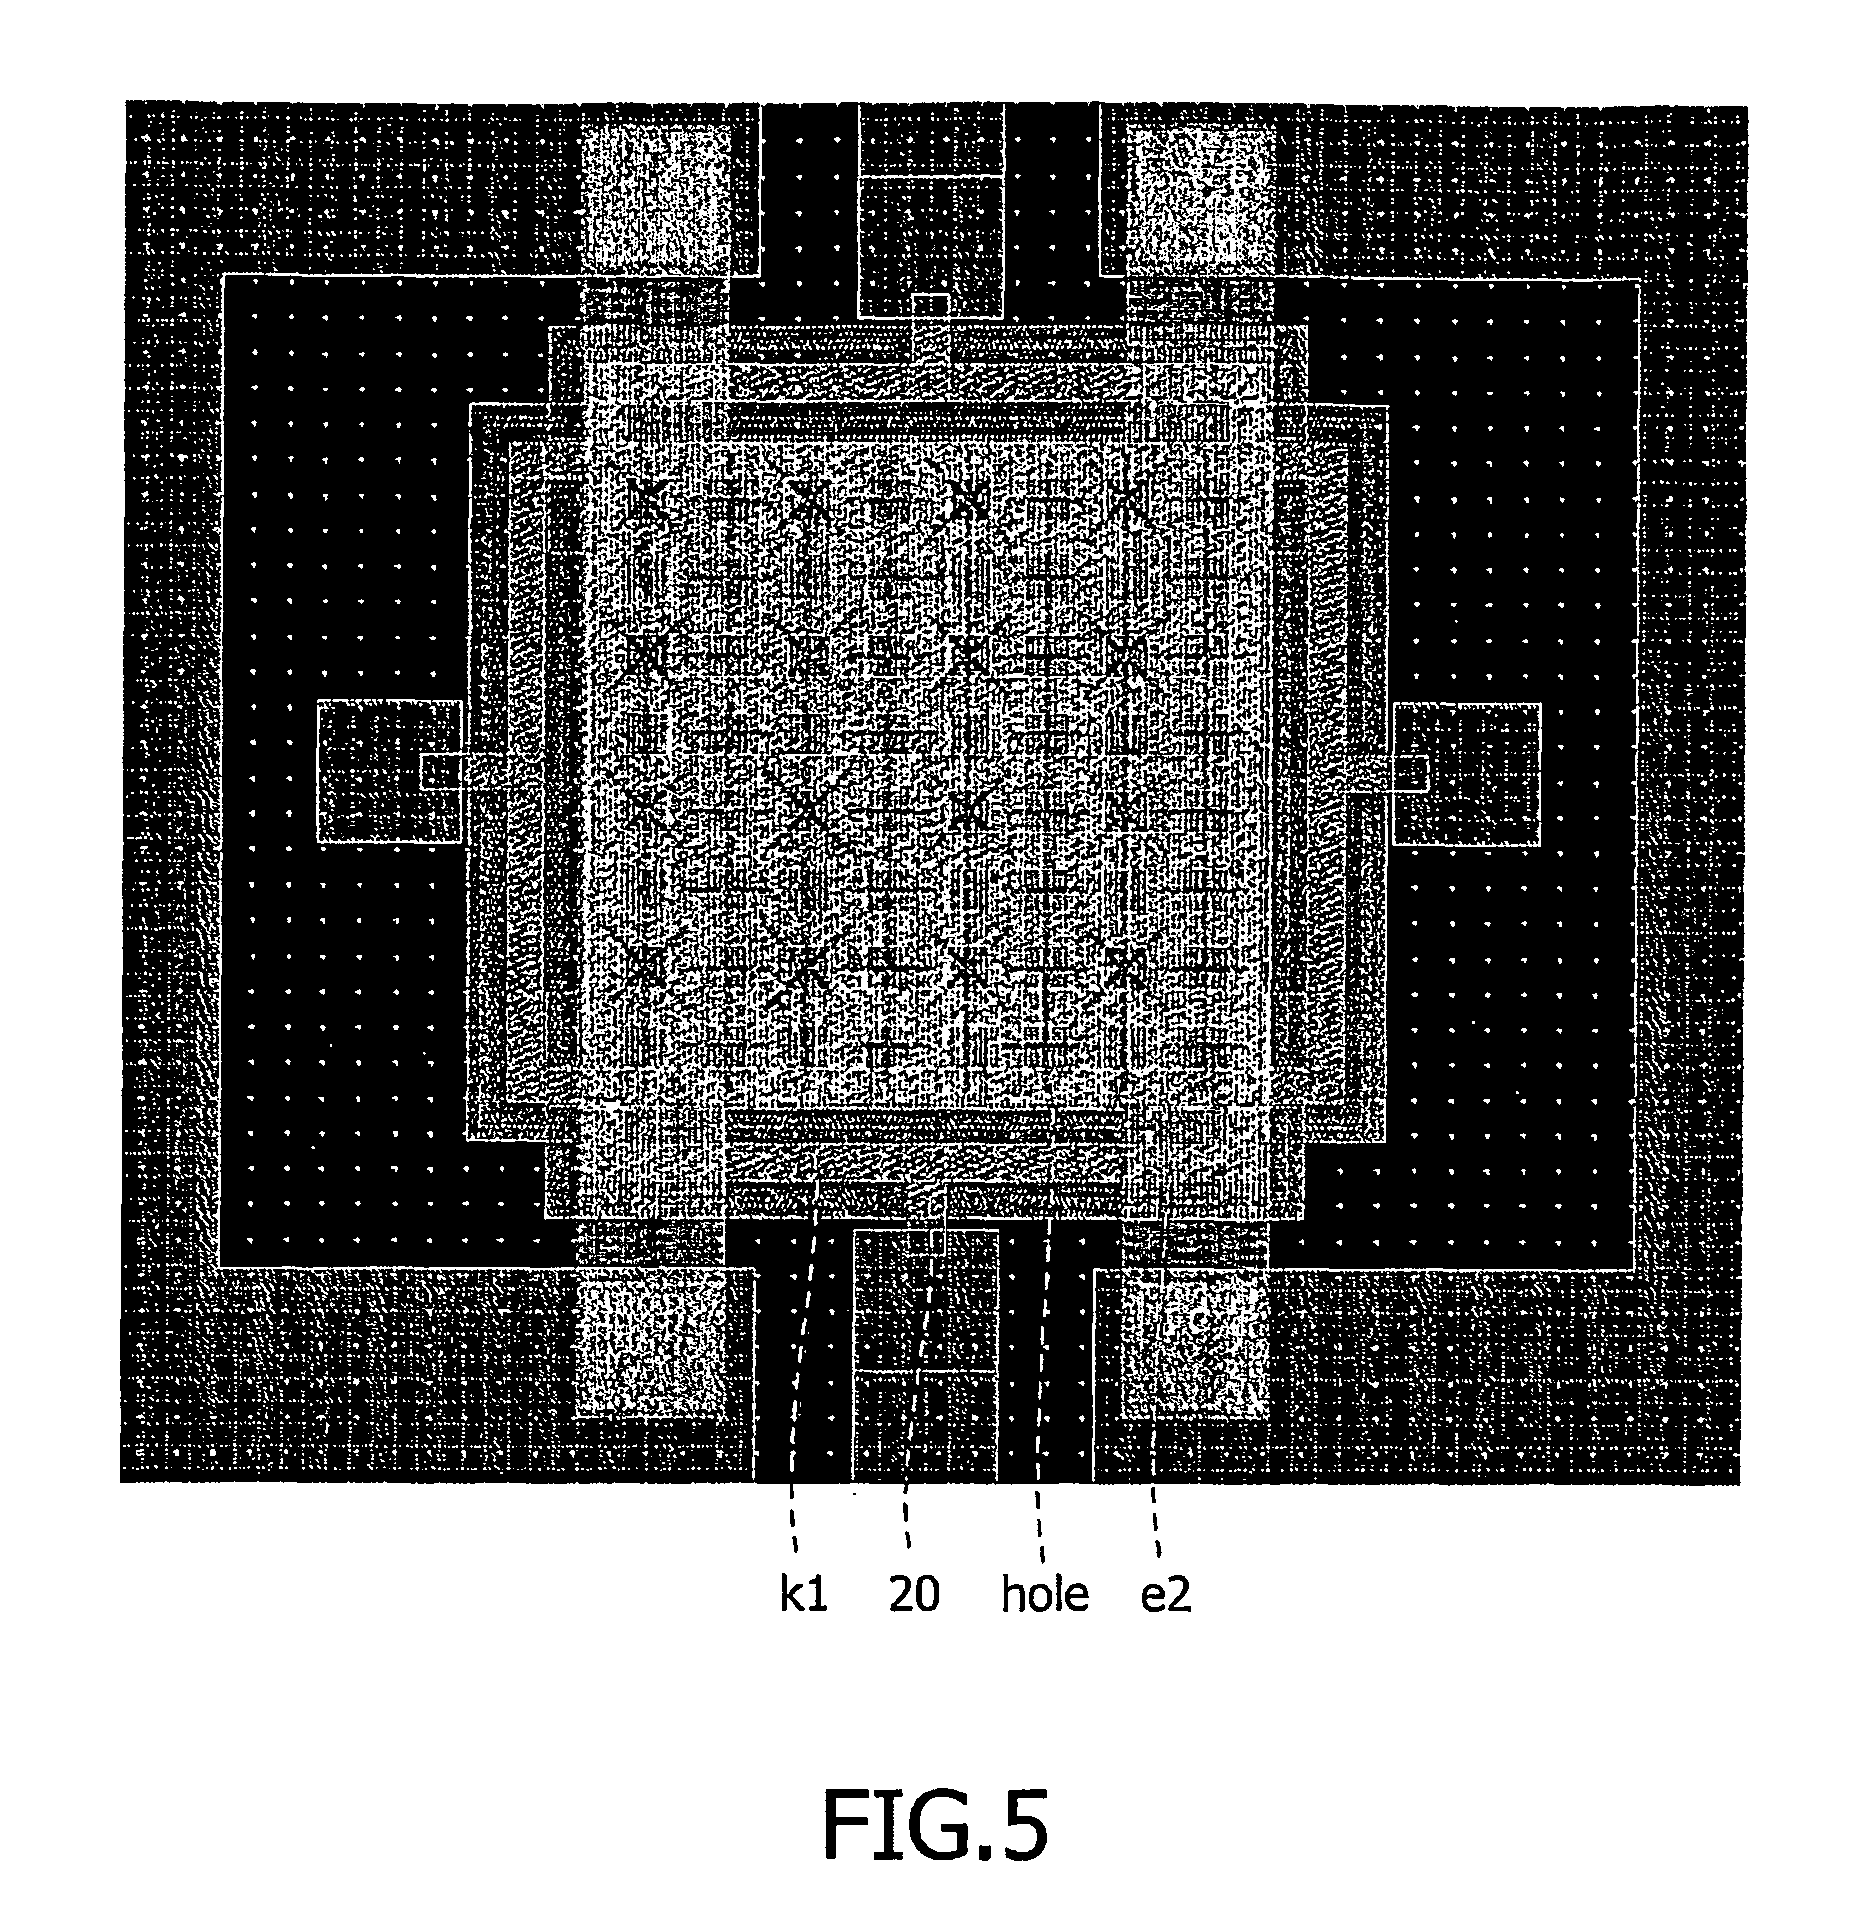 Reduction of air damping in MEMS device